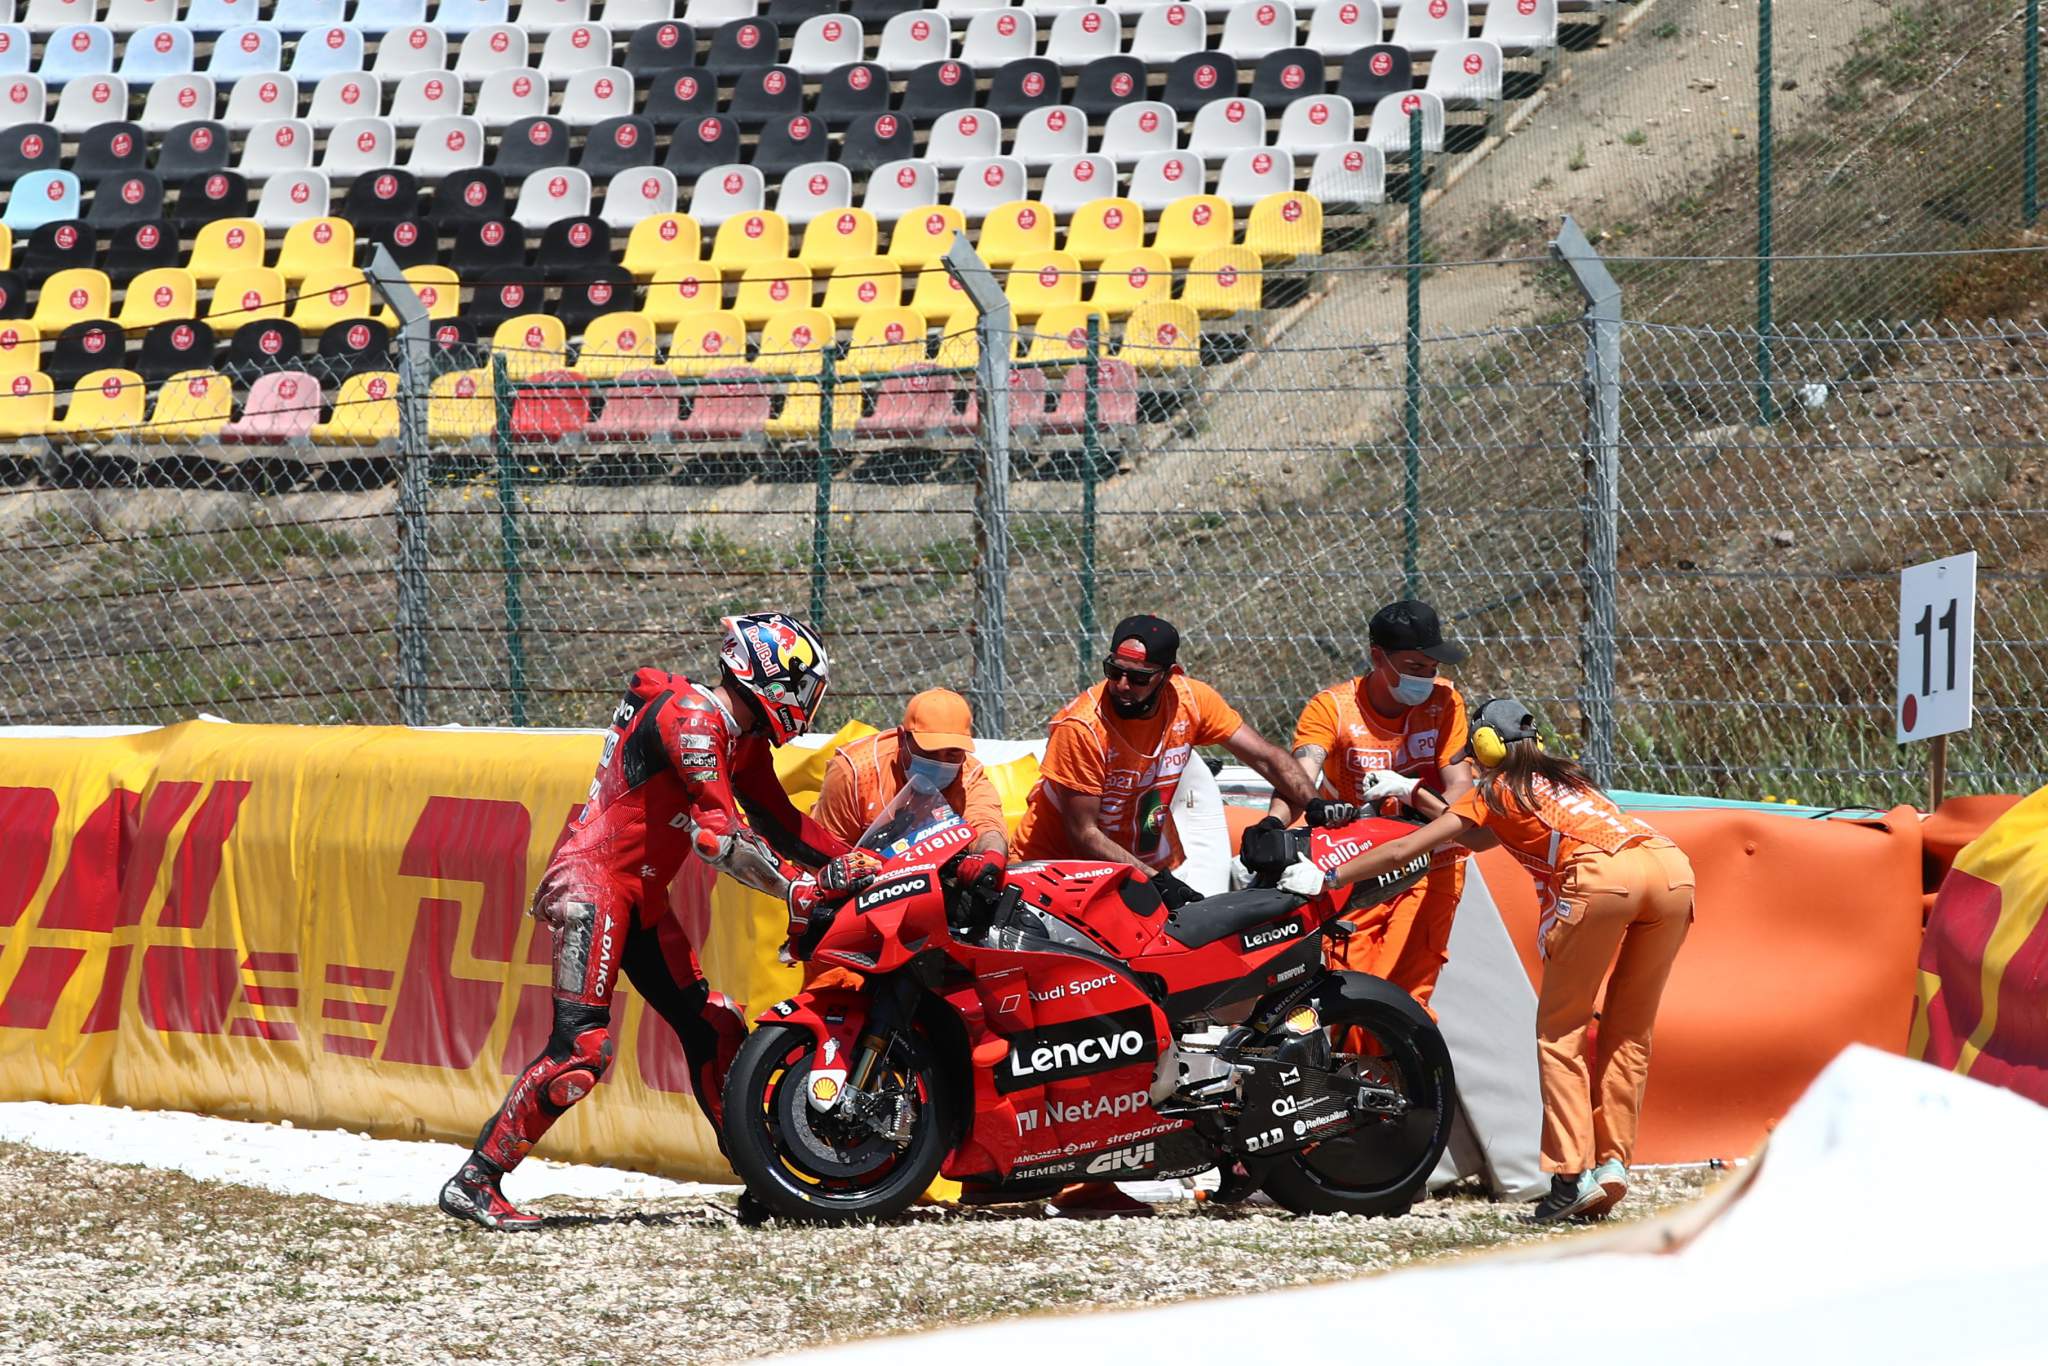 A view of the Ducati machine after Jack Miller's crash, which left him with a gaping hole in his arm